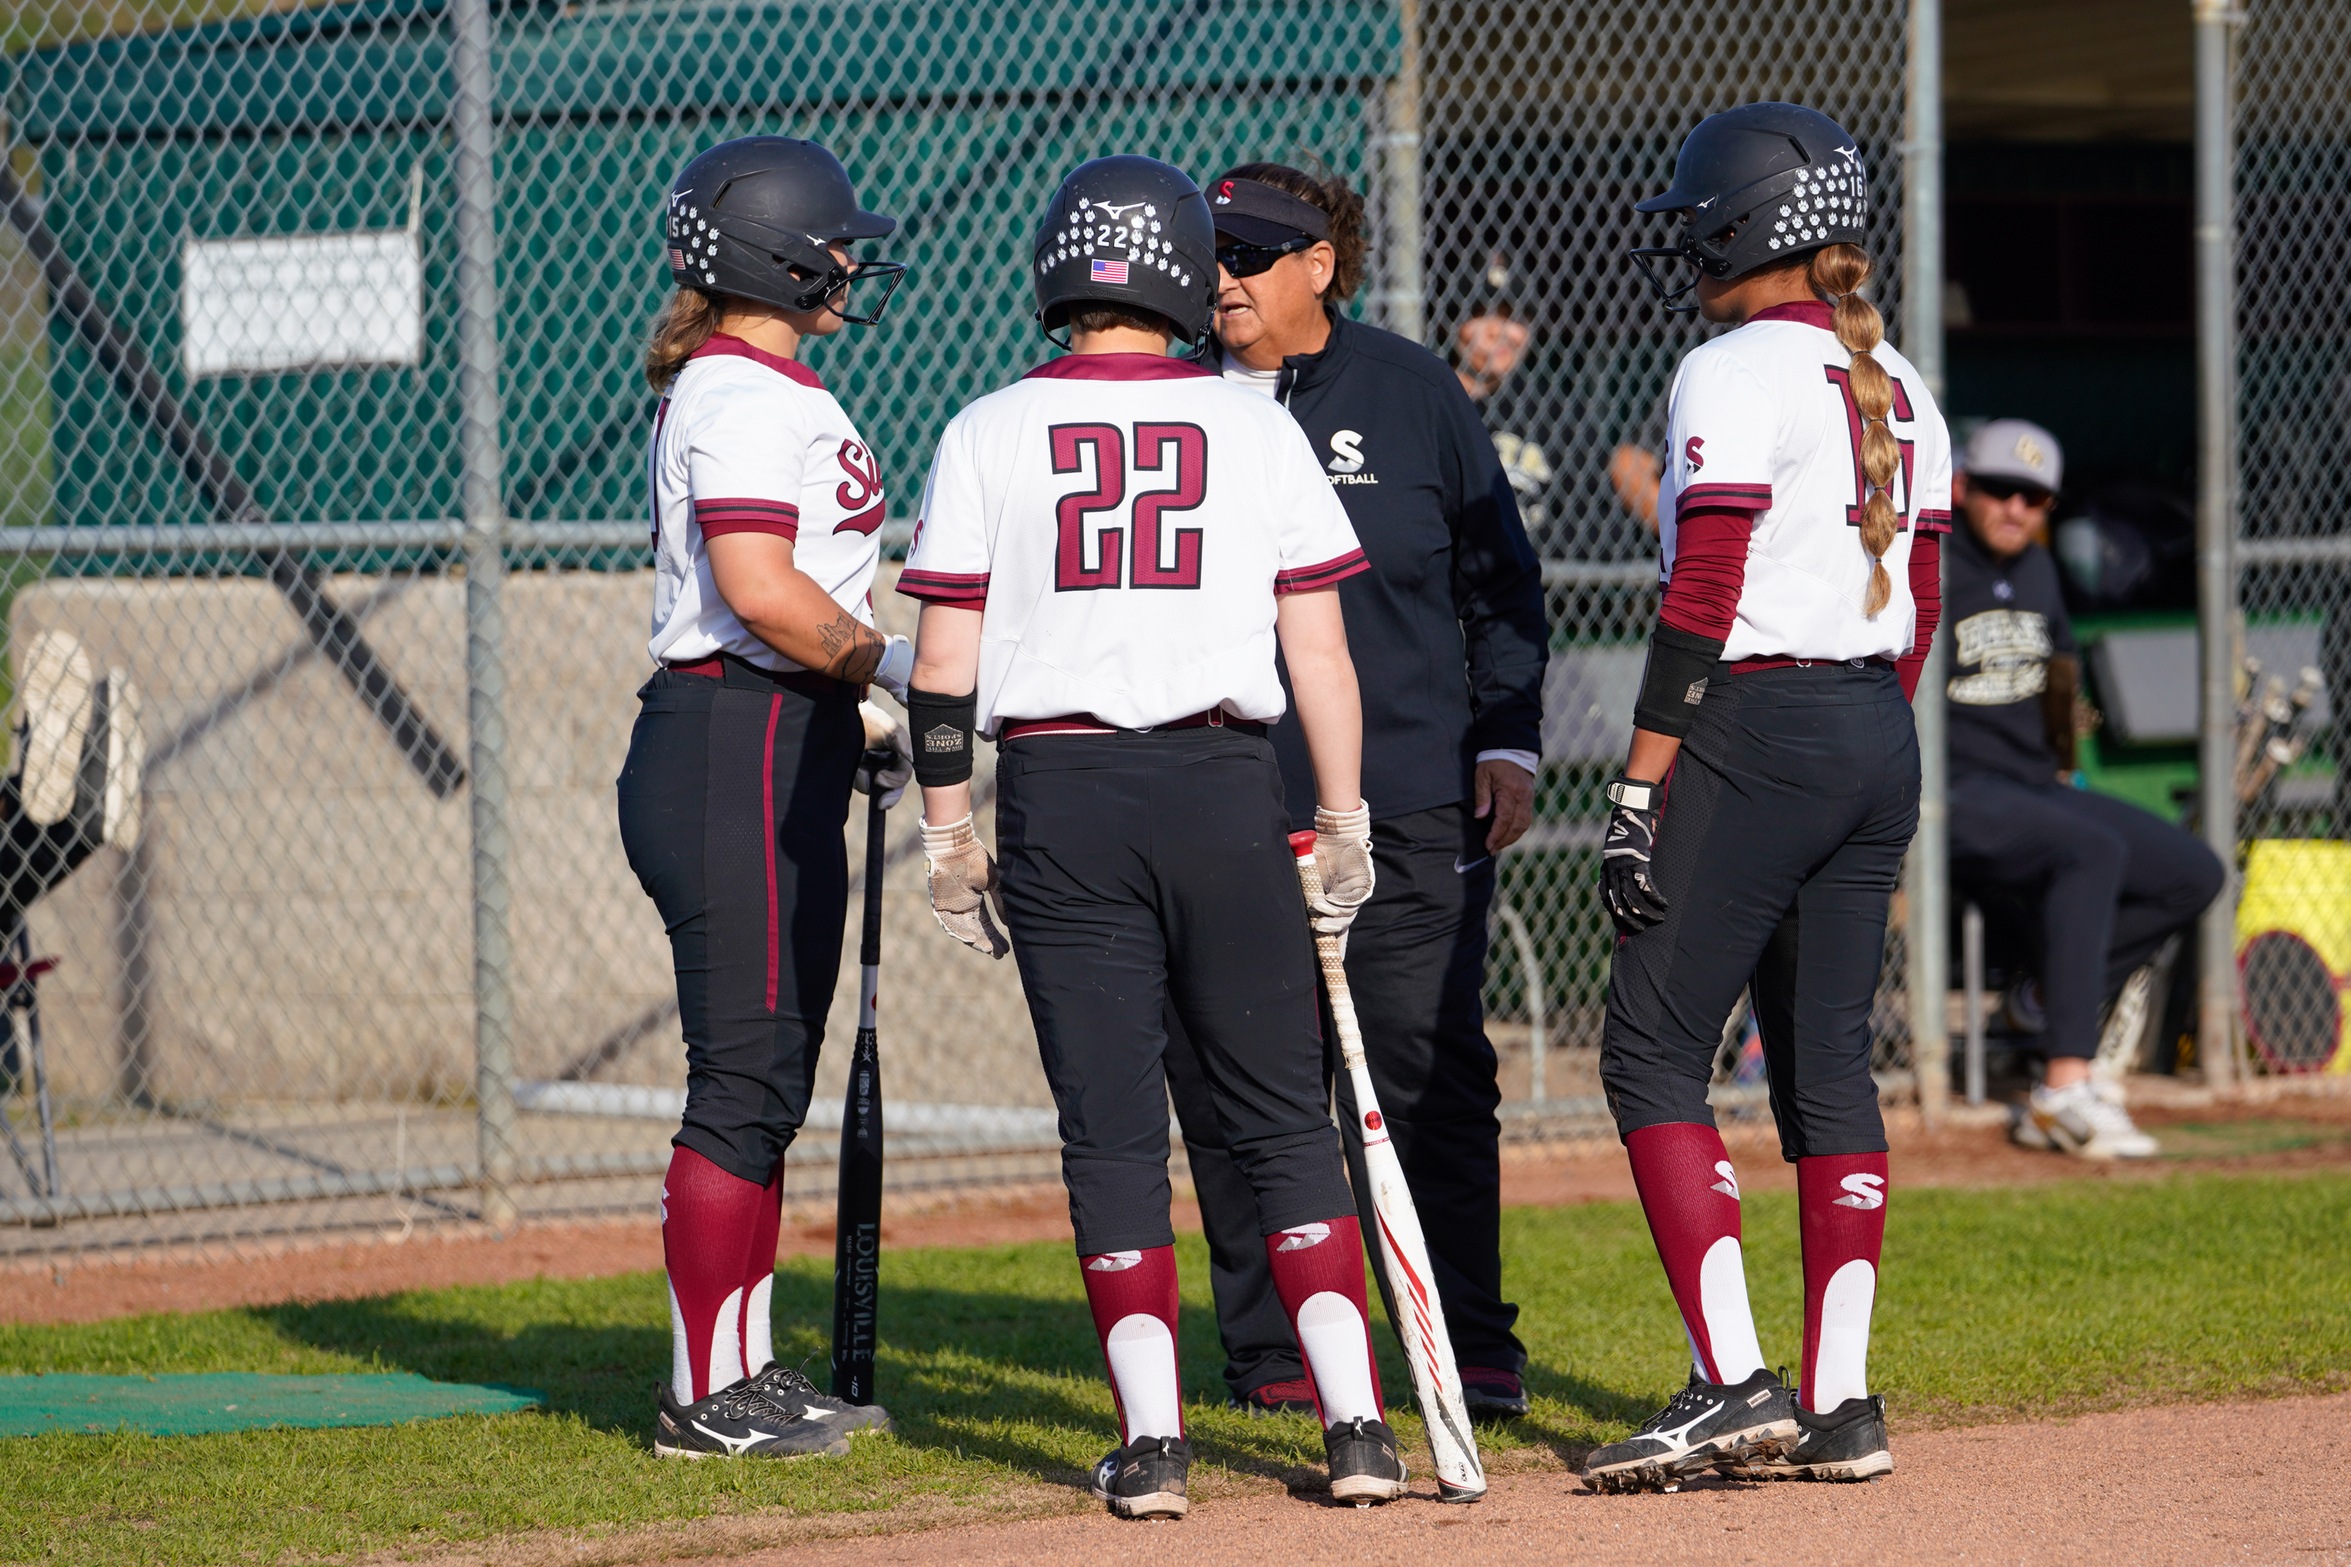 Sierra College softball coach Darci Brownell has coached the Wolverines for 27 years. Pictured here is Brownell strategizing with her players during a game earlier this season.